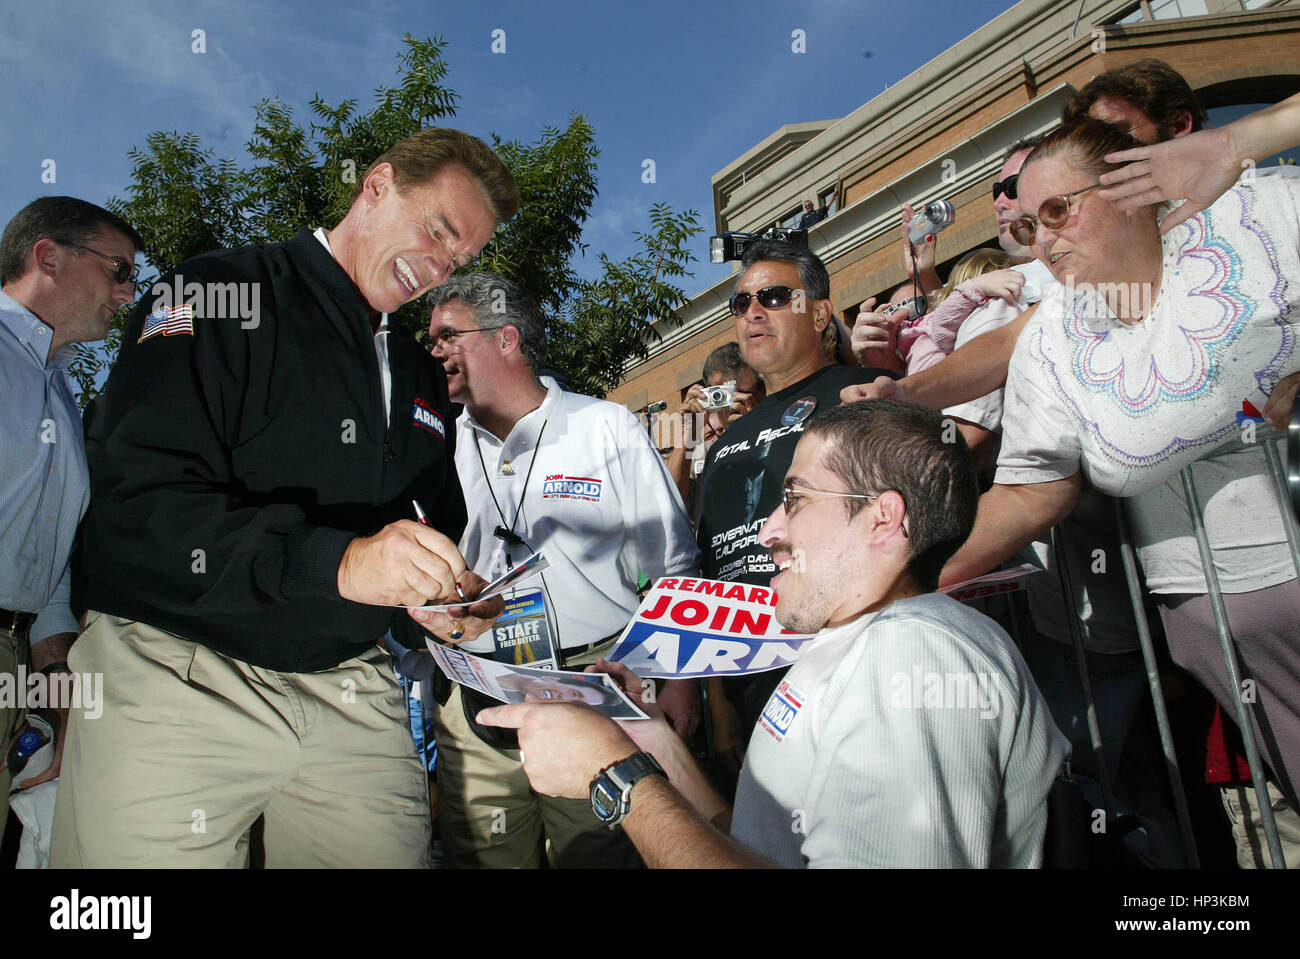 California gubernatorial candidate Arnold Schwarzenegger  signs autographs for supporters during a campaign rally in Modesto, Calif. on Saturday, 4 , October 2003. Schwarzenegger is running in the 7 October recall election. Photo by Francis Specker Stock Photo